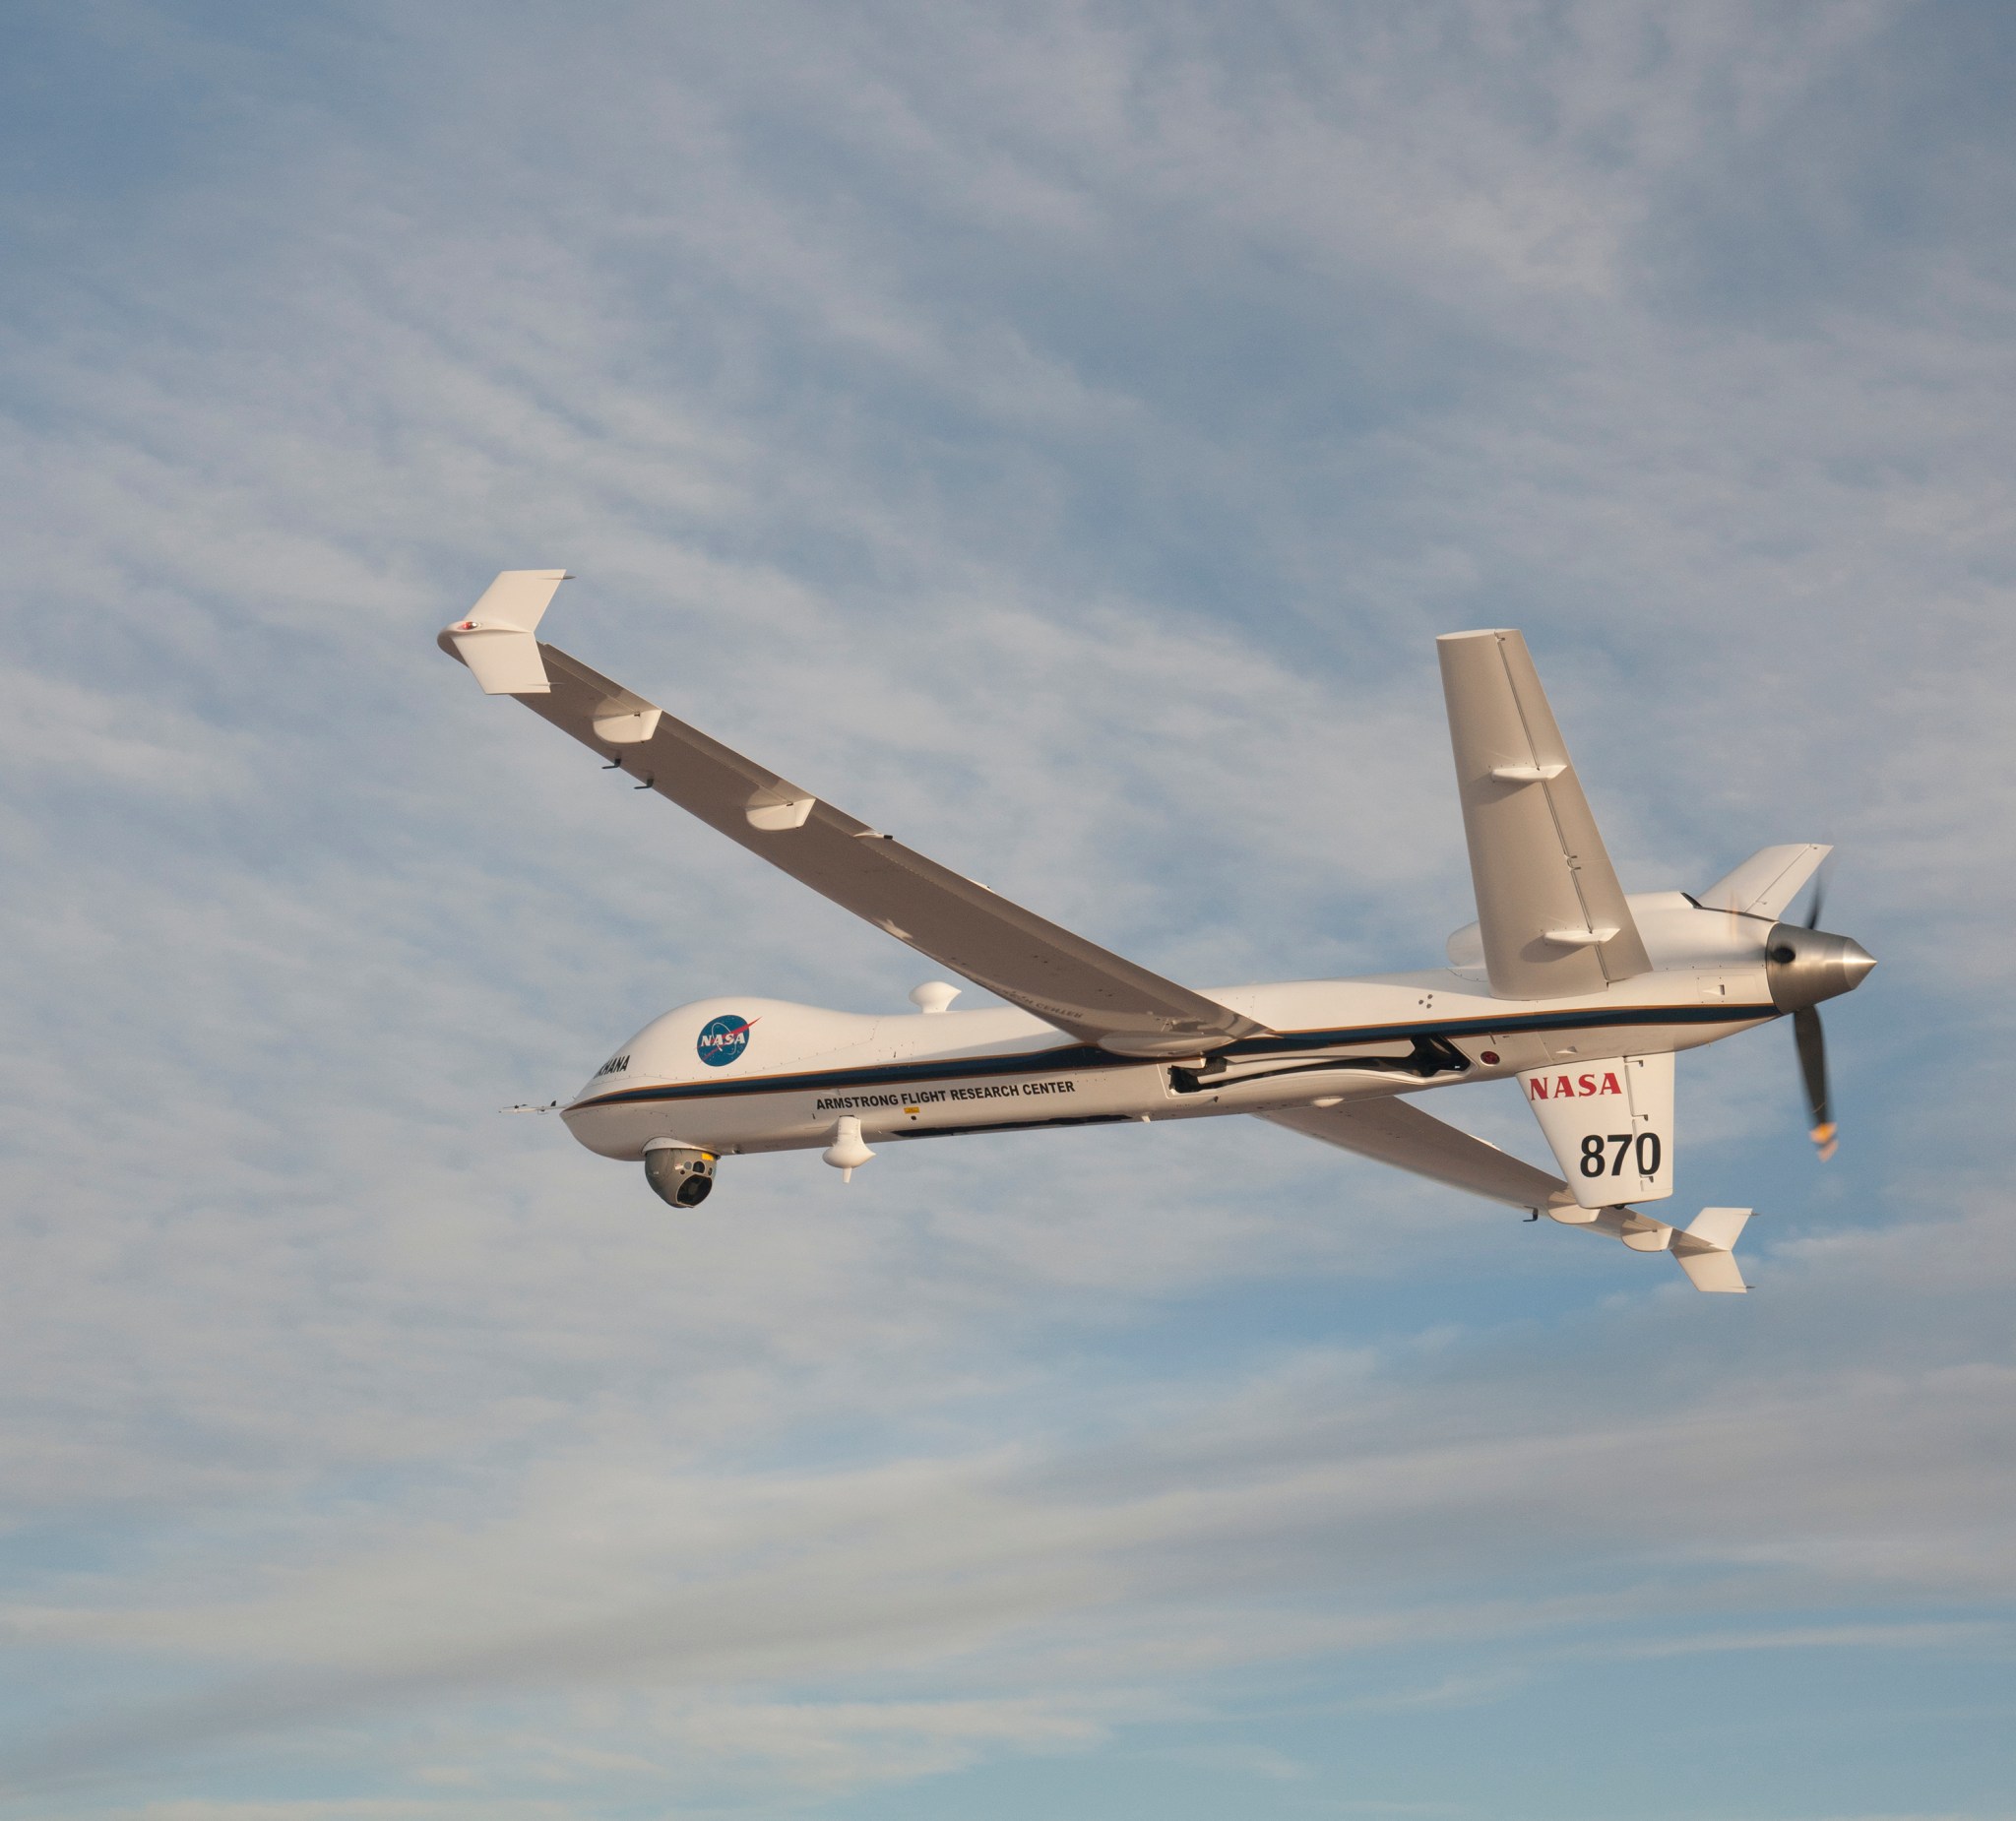 The Ikhana remotely piloted aircraft captured real-time video when the Orion Exploration Flight Test-1 mission concluded.